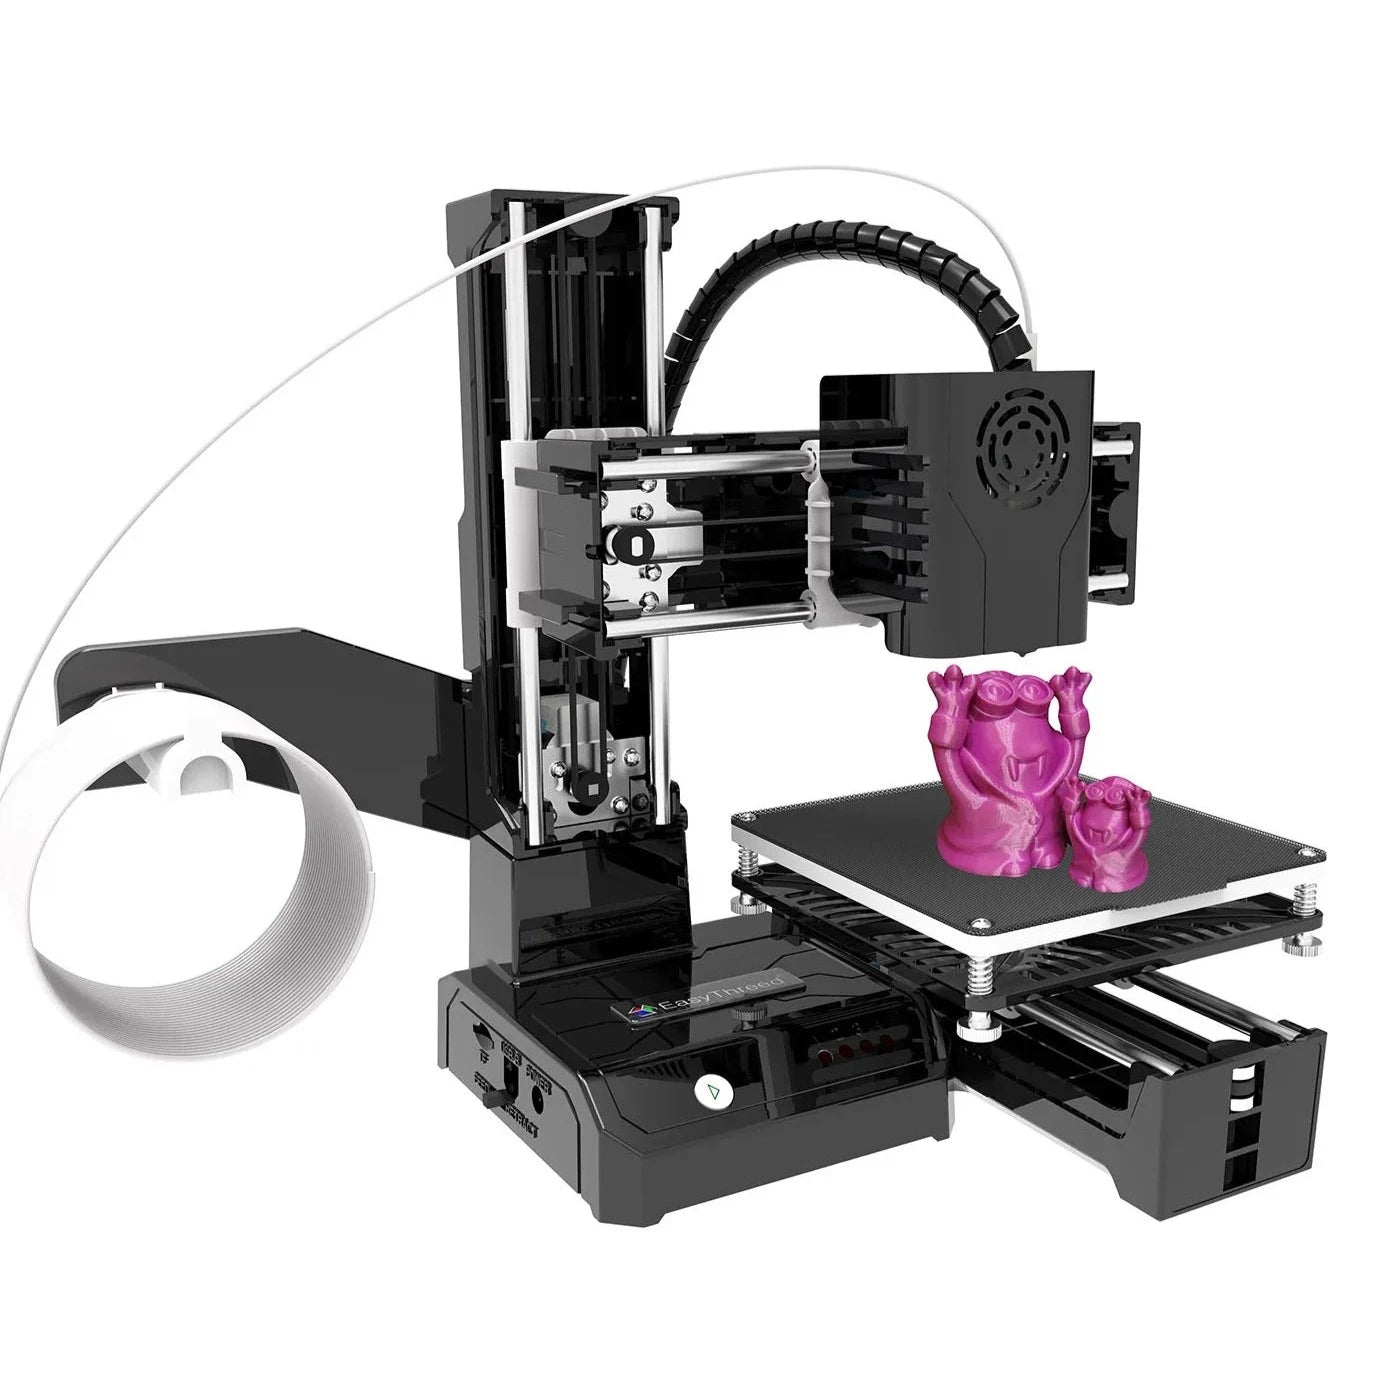 46199595532520|46199595565288|46199595630824|The Easy Thread K9 Mini 3D Printer is a powerful and user-friendly printer that makes 3D printing easy and efficient. With its easy thread function, you can quickly and effortlessly change filament, saving you time and hassle. Enjoy high-quality prints and bring your ideas to life with this advanced printer. 46199595696360|46199595794664